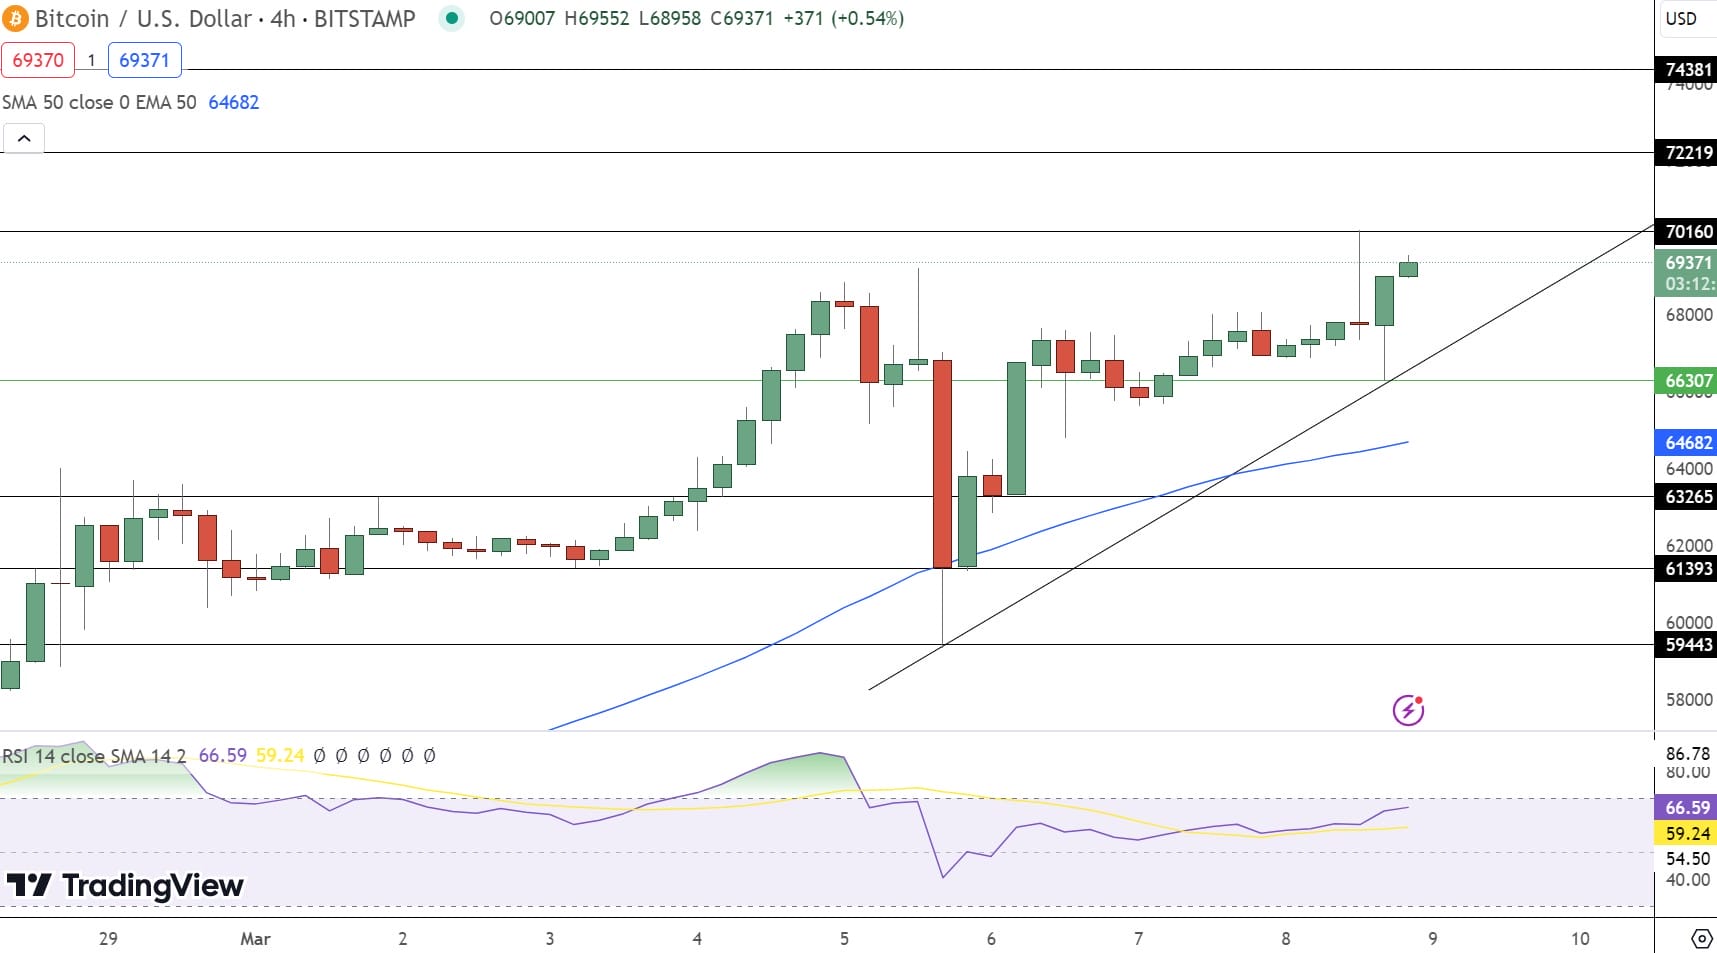 Bitcoin 2 Price Prediction up to $ by - BTC2 Forecast - 